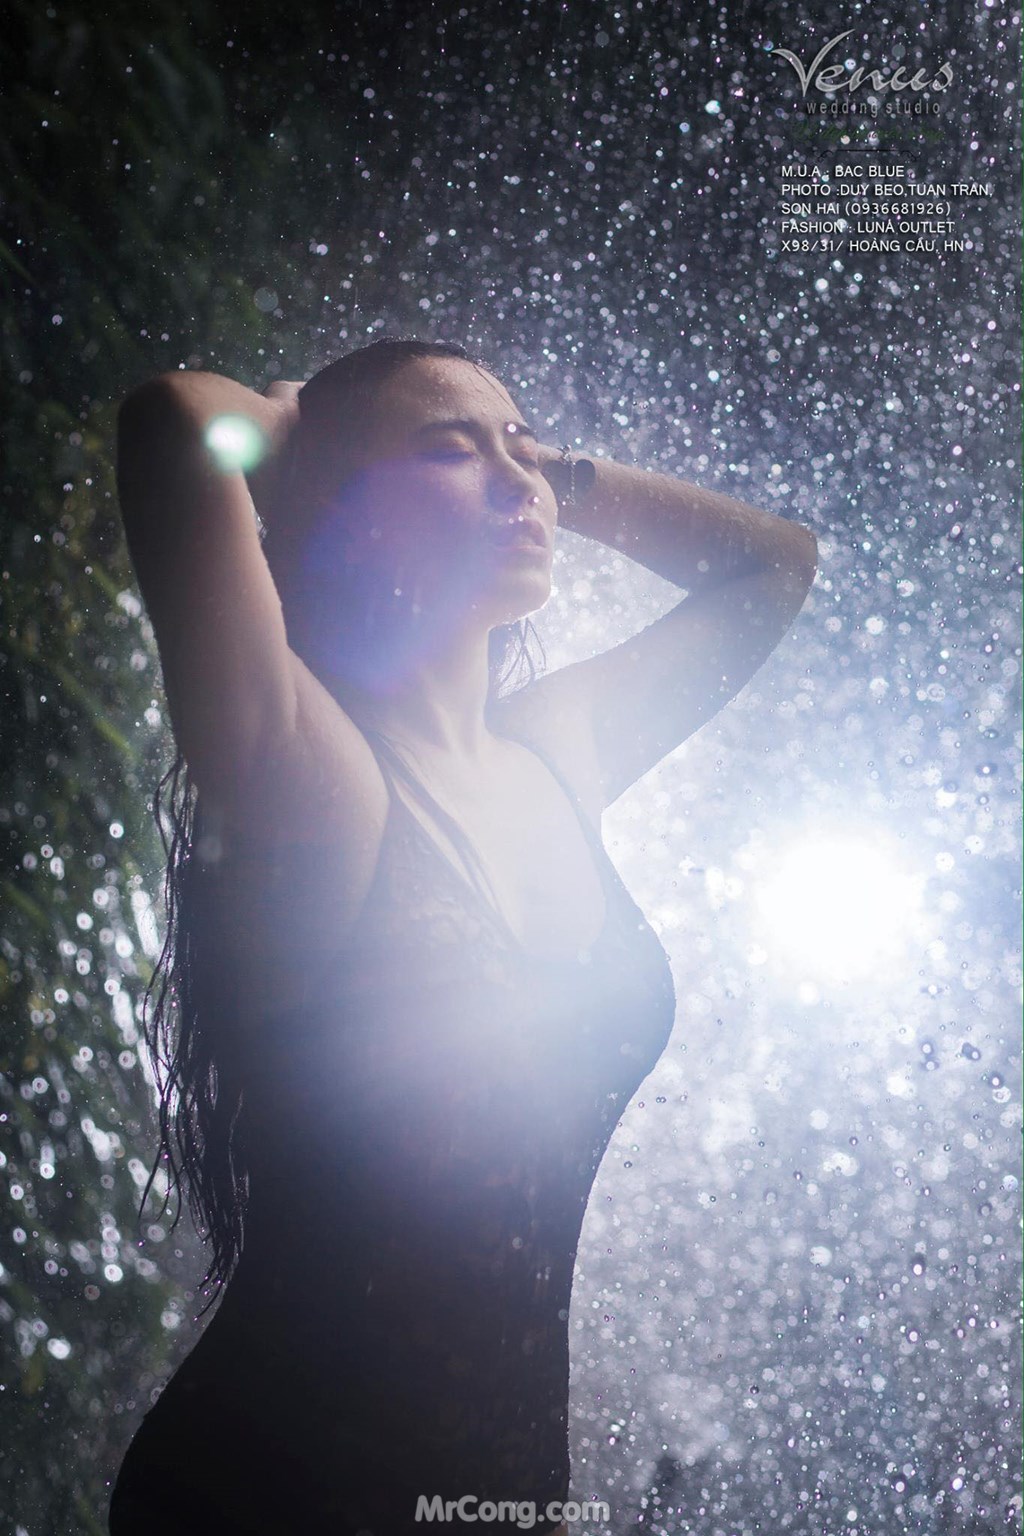 Linh Miu boldly let go of her chest in a set of photos taken under a waterfall